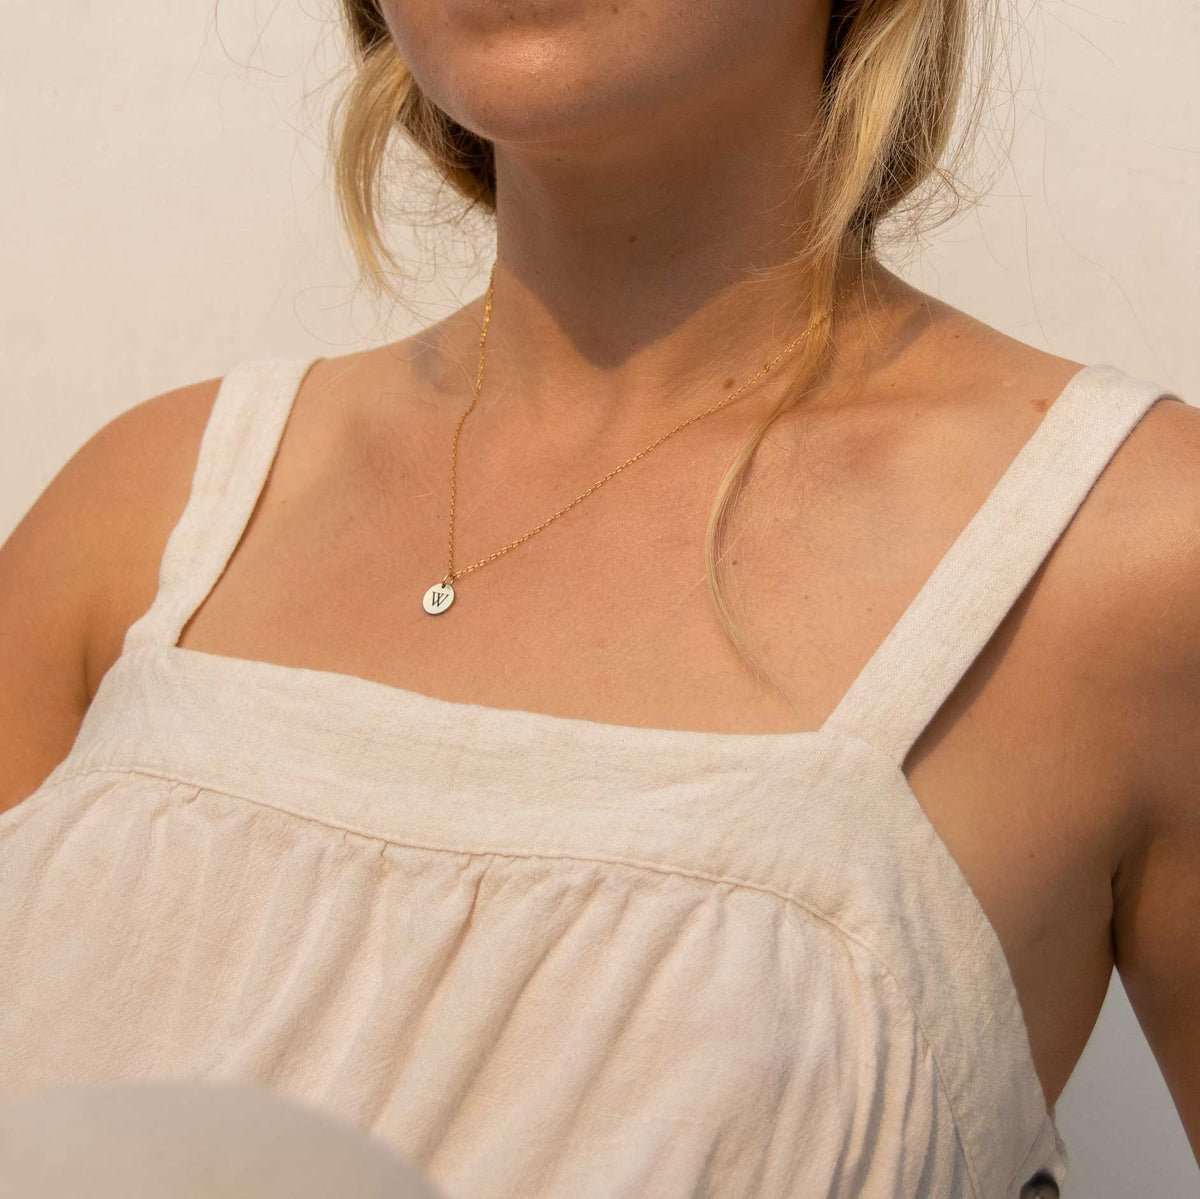 A woman wearing the 10mm circle necklace while reclining backwards.